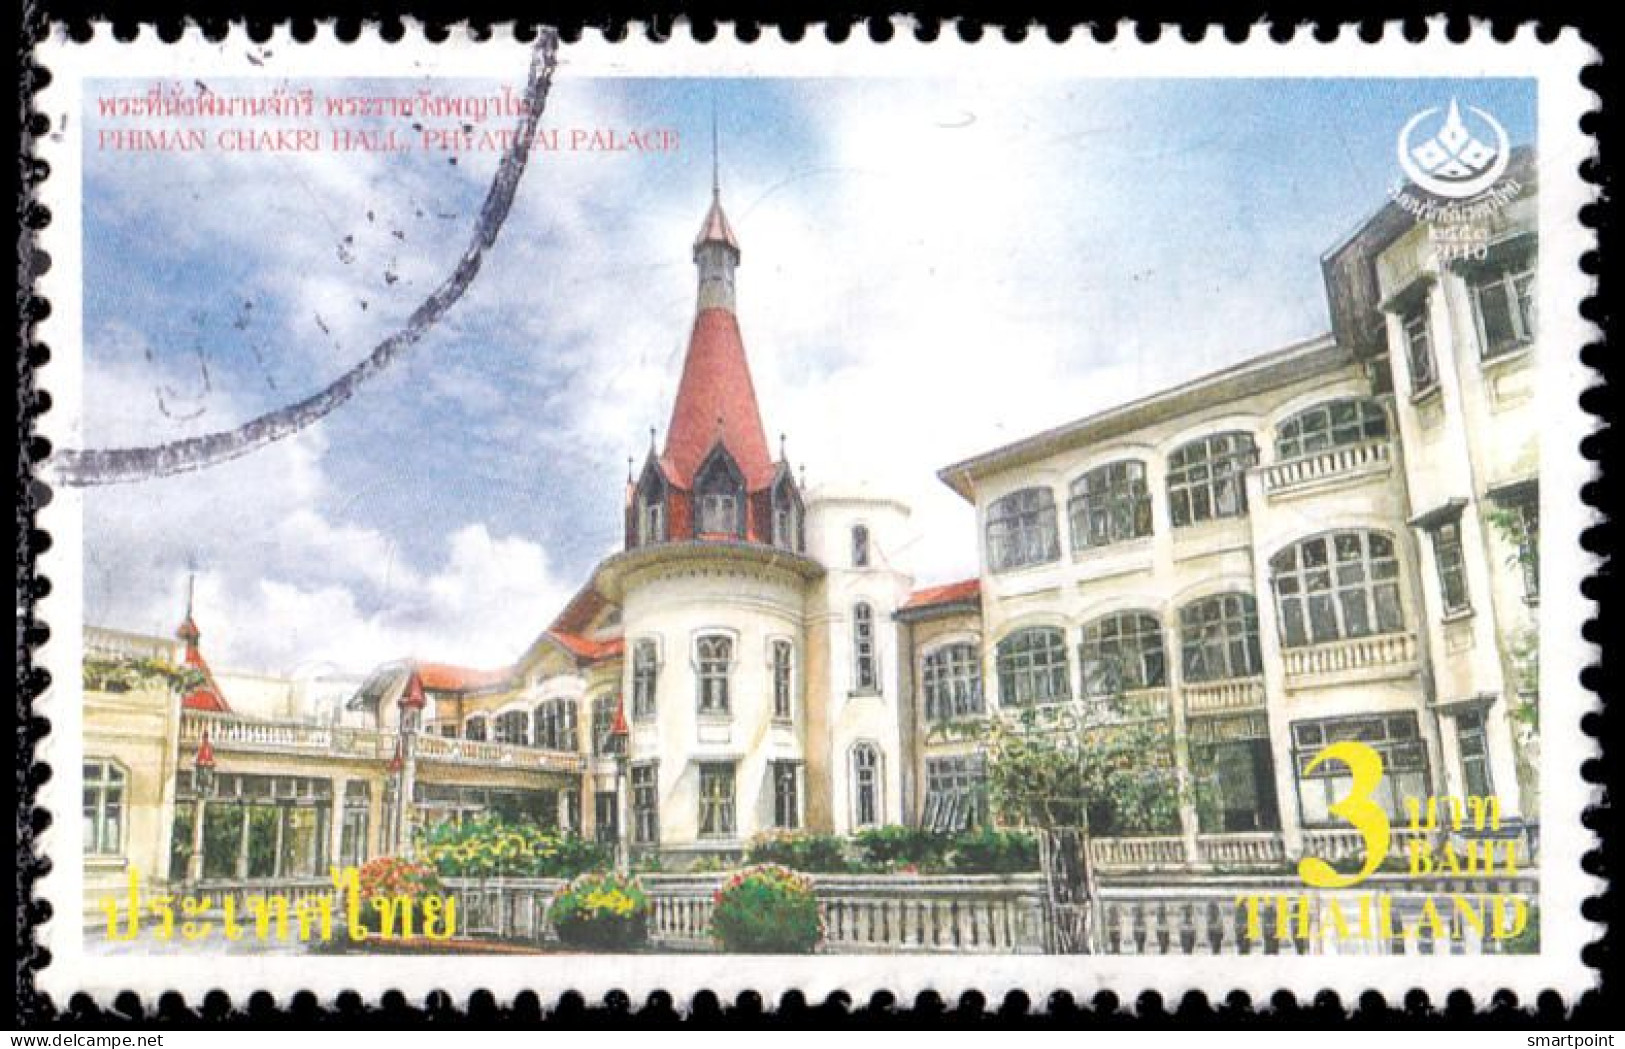 Thailand Stamp 2010 Thai Heritage Conservation Day 3 Baht - Used - Thailand